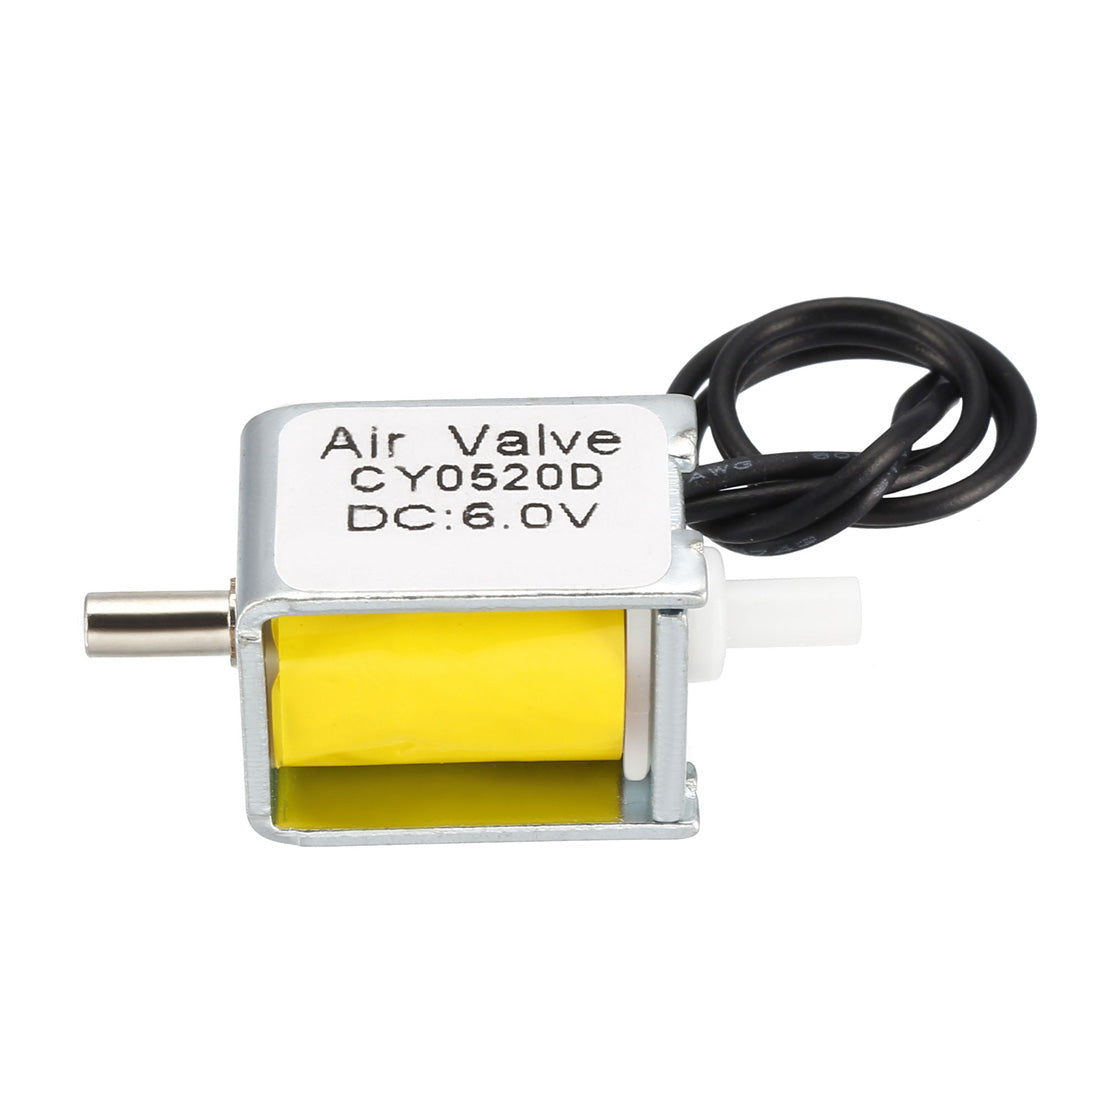 uxcell Uxcell Miniature Solenoid Valve 2 Way Normally Opened DC6V 0.06A Air Solenoid Valve